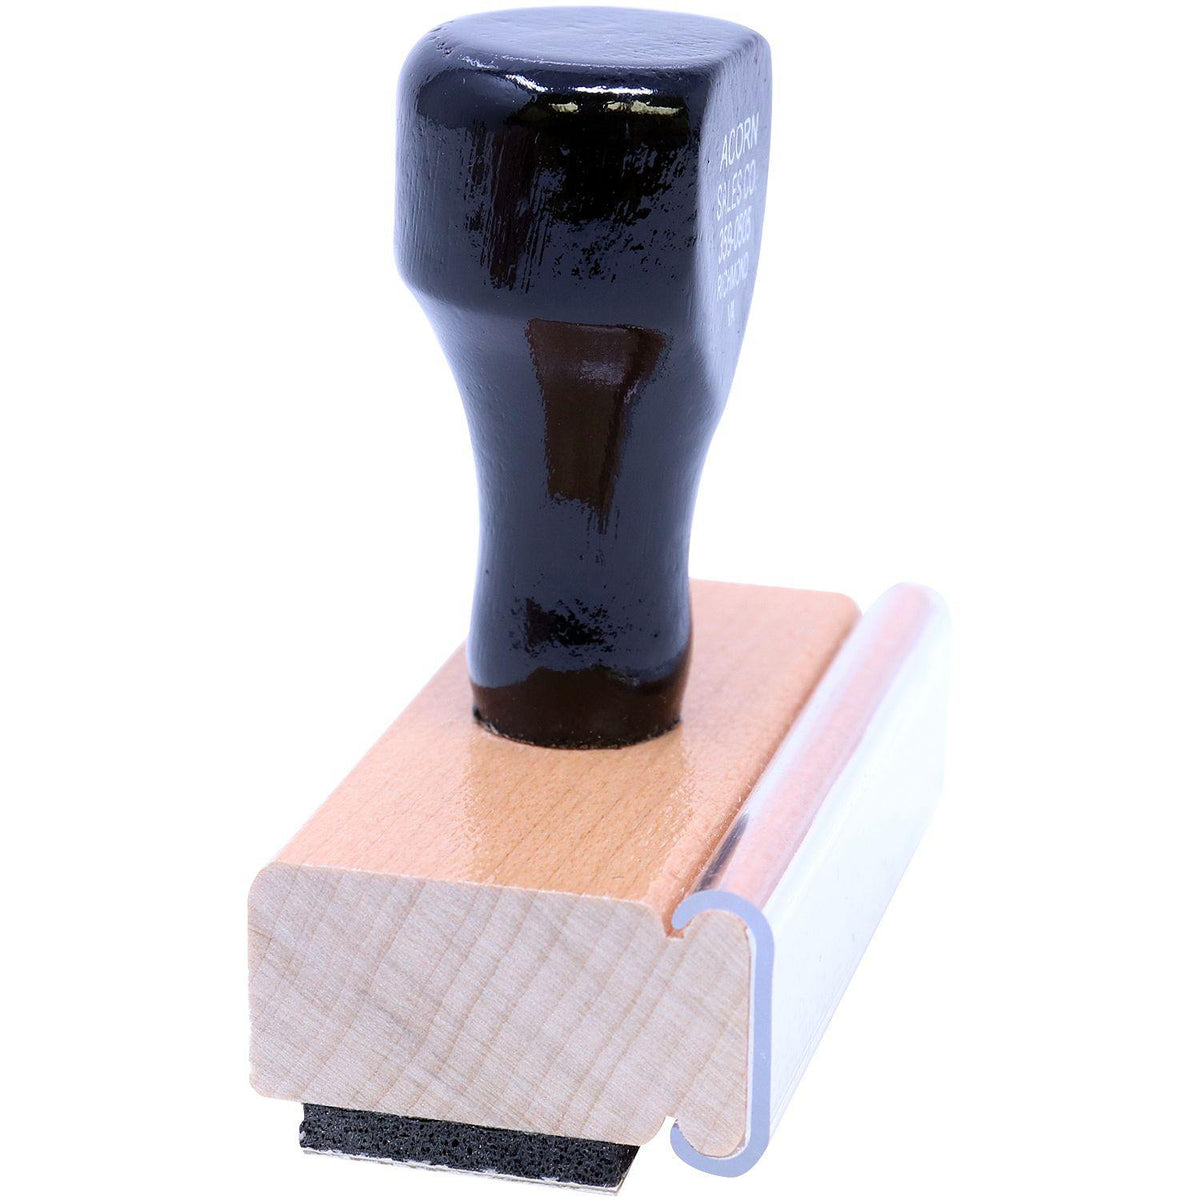 Side View of Large Insurance Verified Rubber Stamp at an Angle